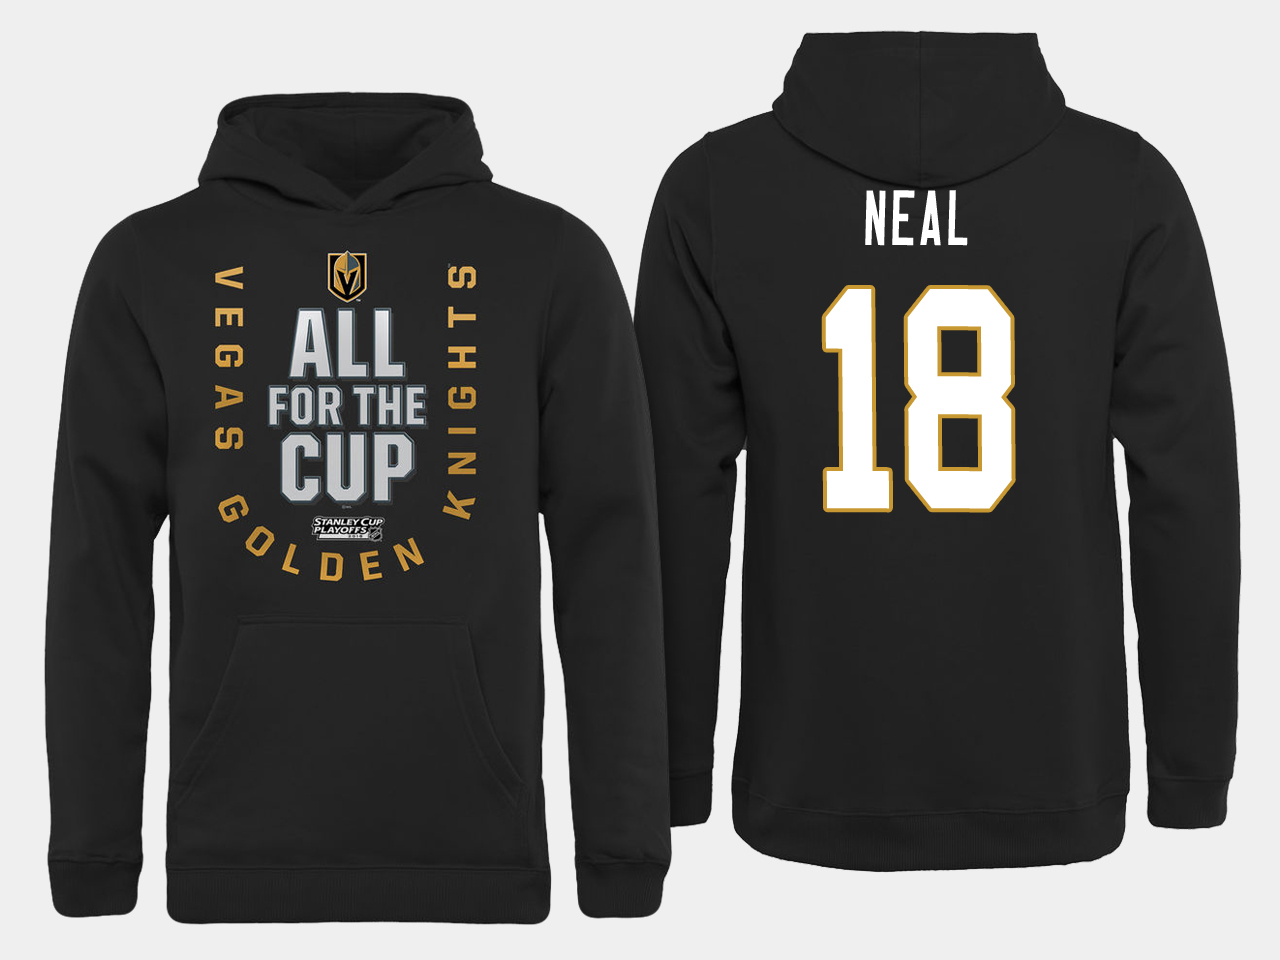 Men NHL Vegas Golden Knights #18 Neal All for the Cup hoodie->more nhl jerseys->NHL Jersey